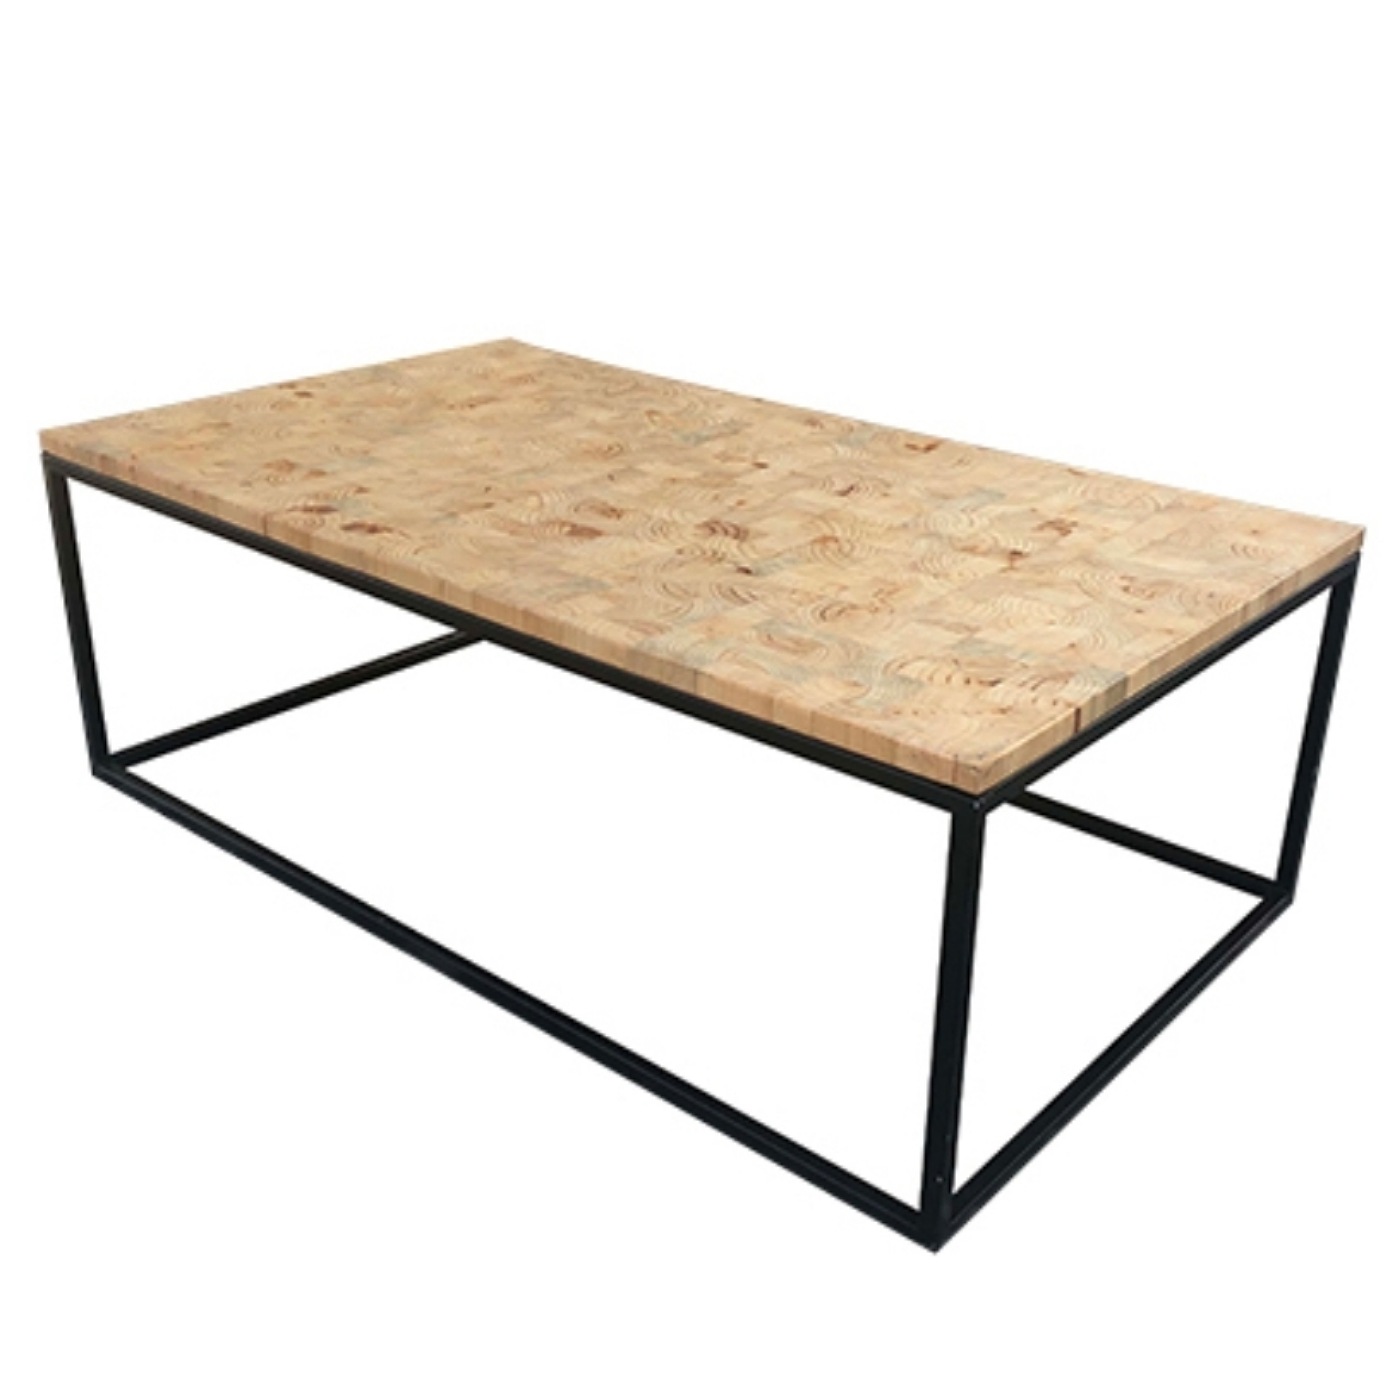 Coffee Table With Black Steel Rectangular Frame With A Natural Wooden Top.